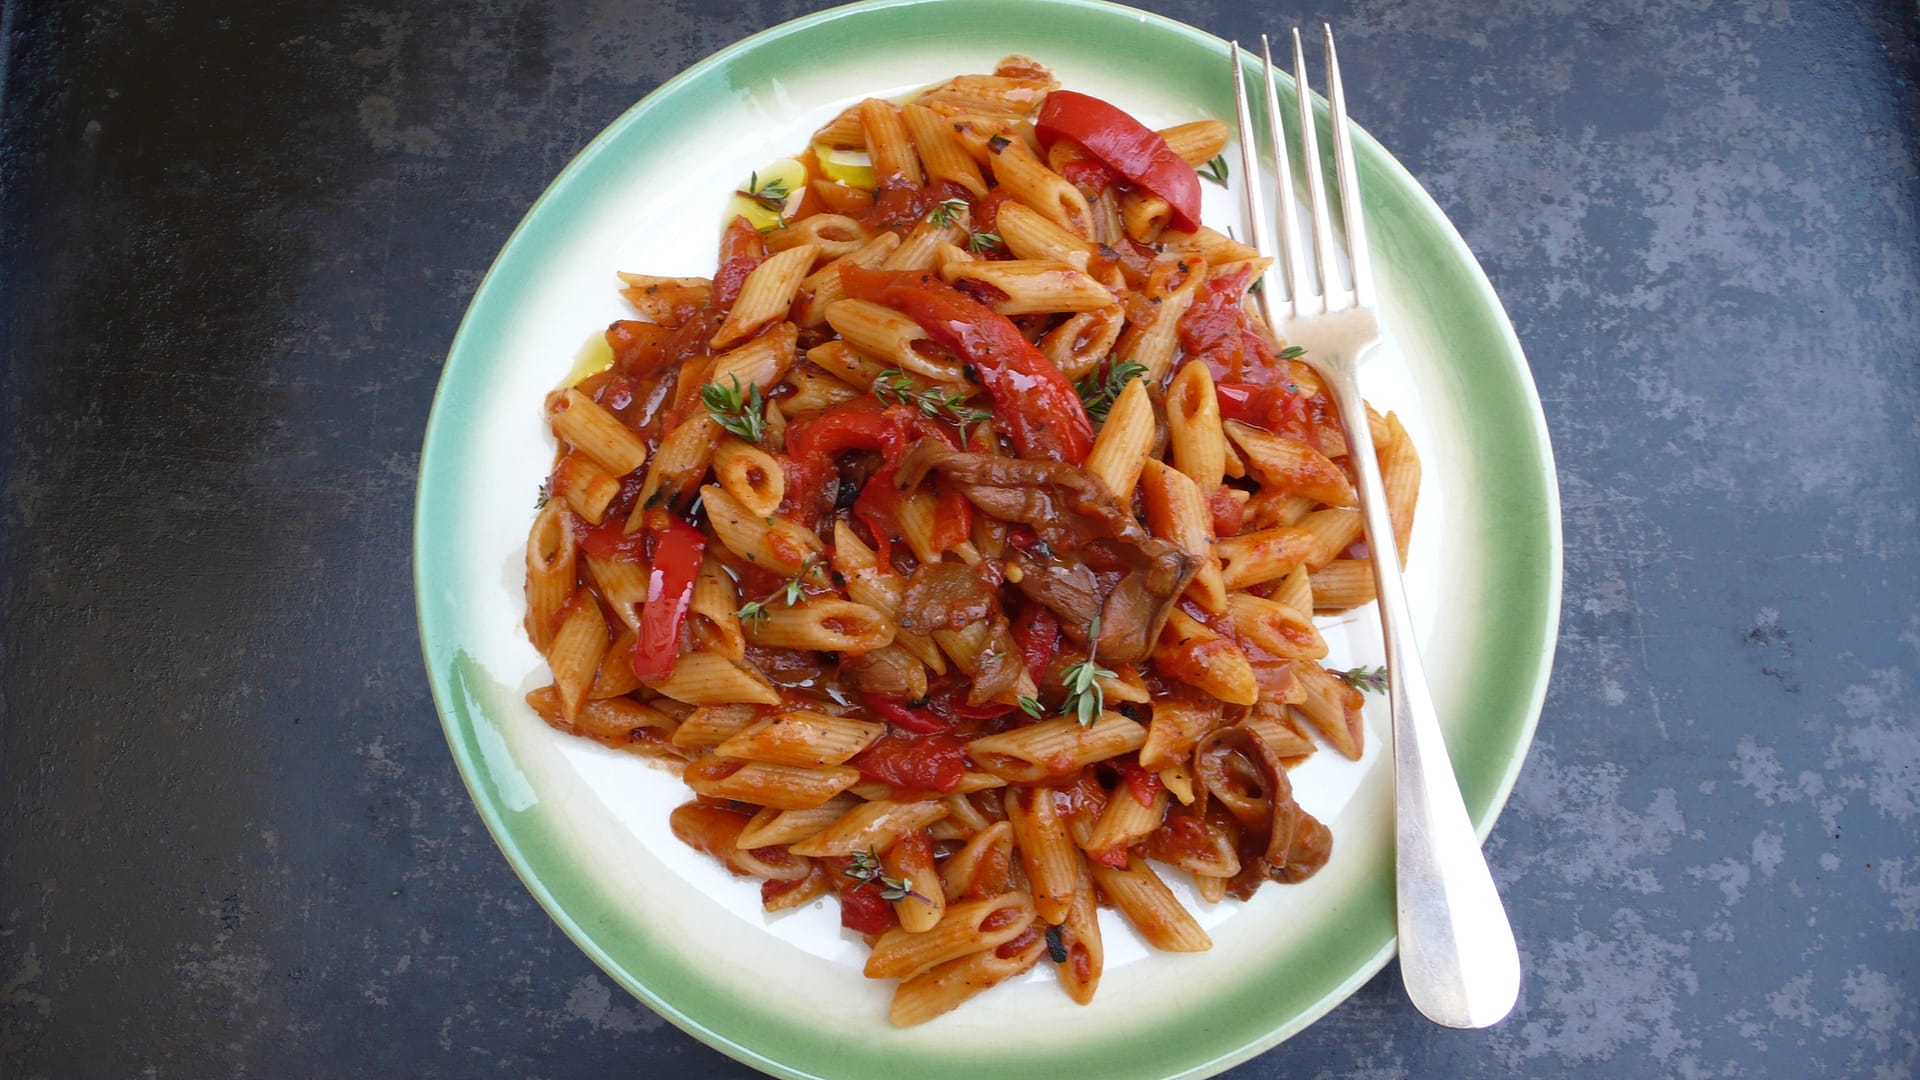 a delicious plate of pasta with porcini and sweet peppers in tomato sauce